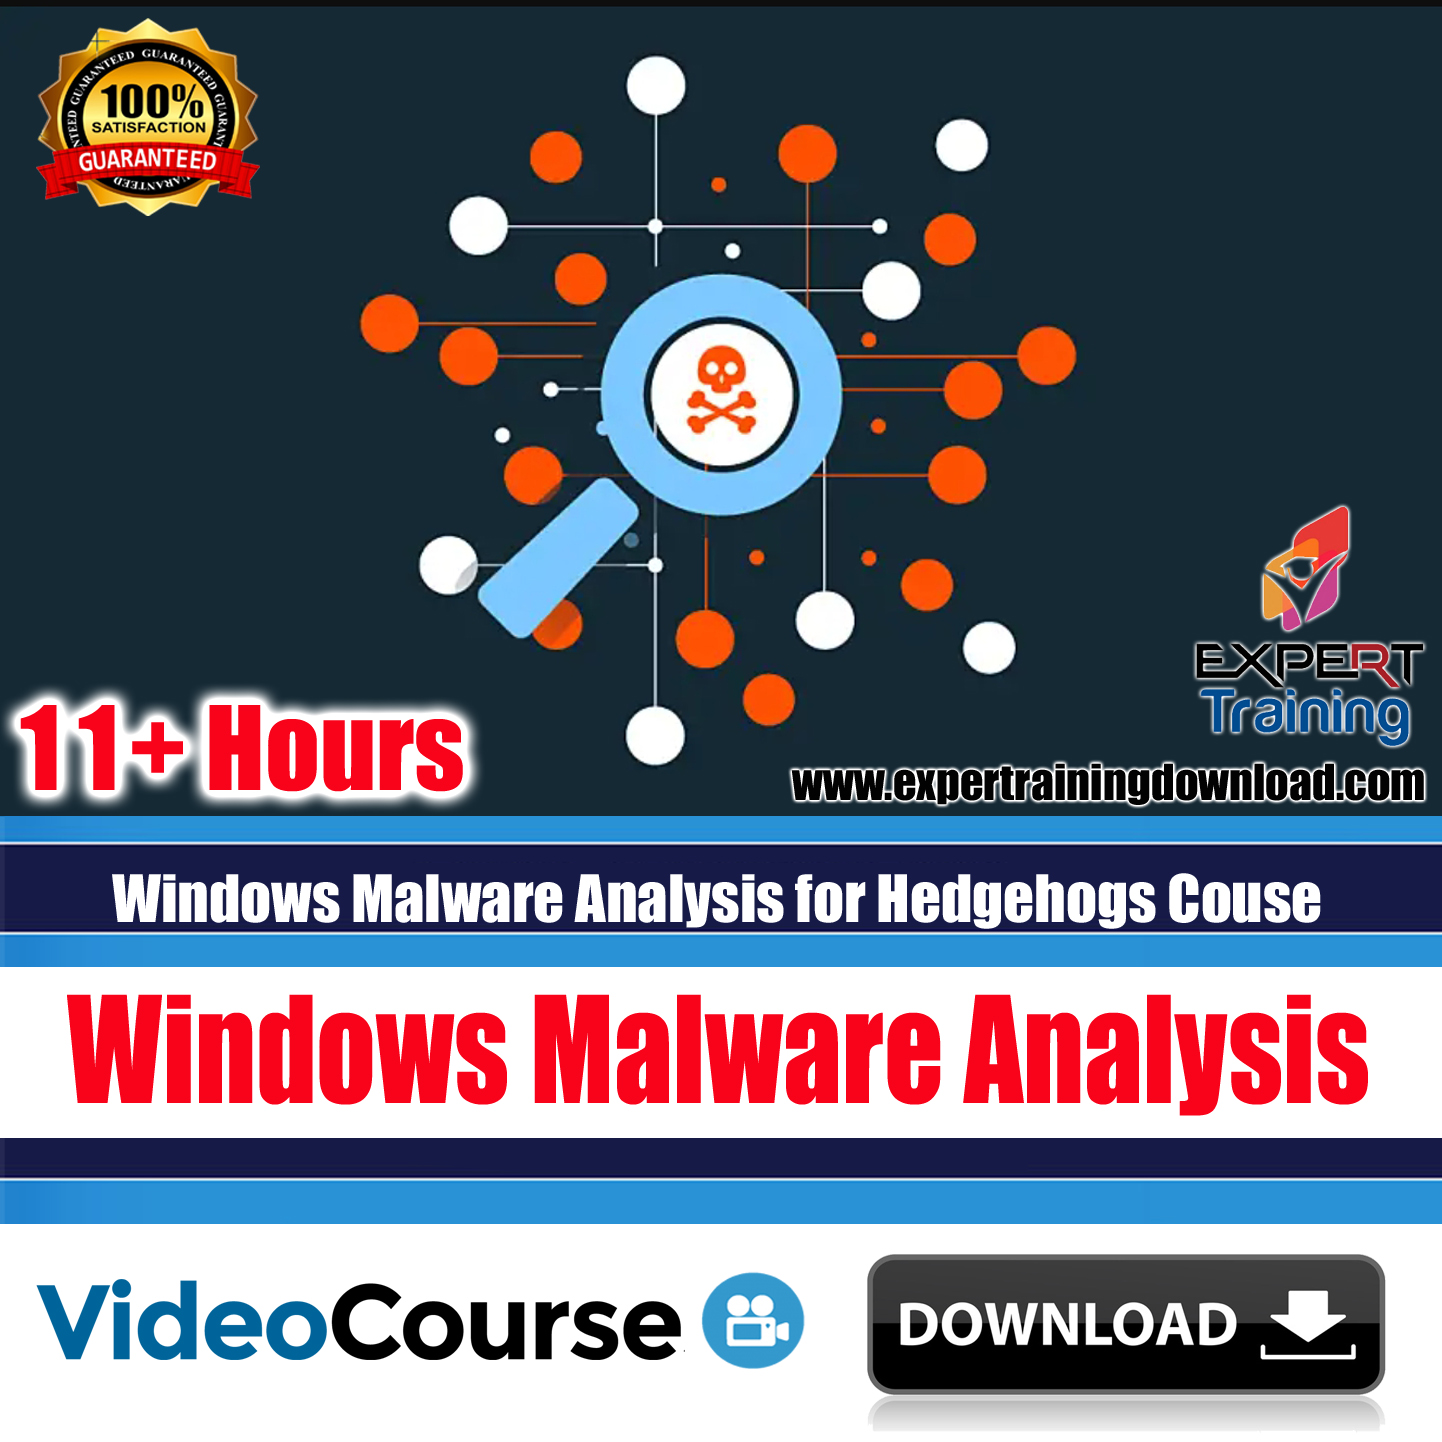 Windows Malware Analysis for Hedgehogs Couse